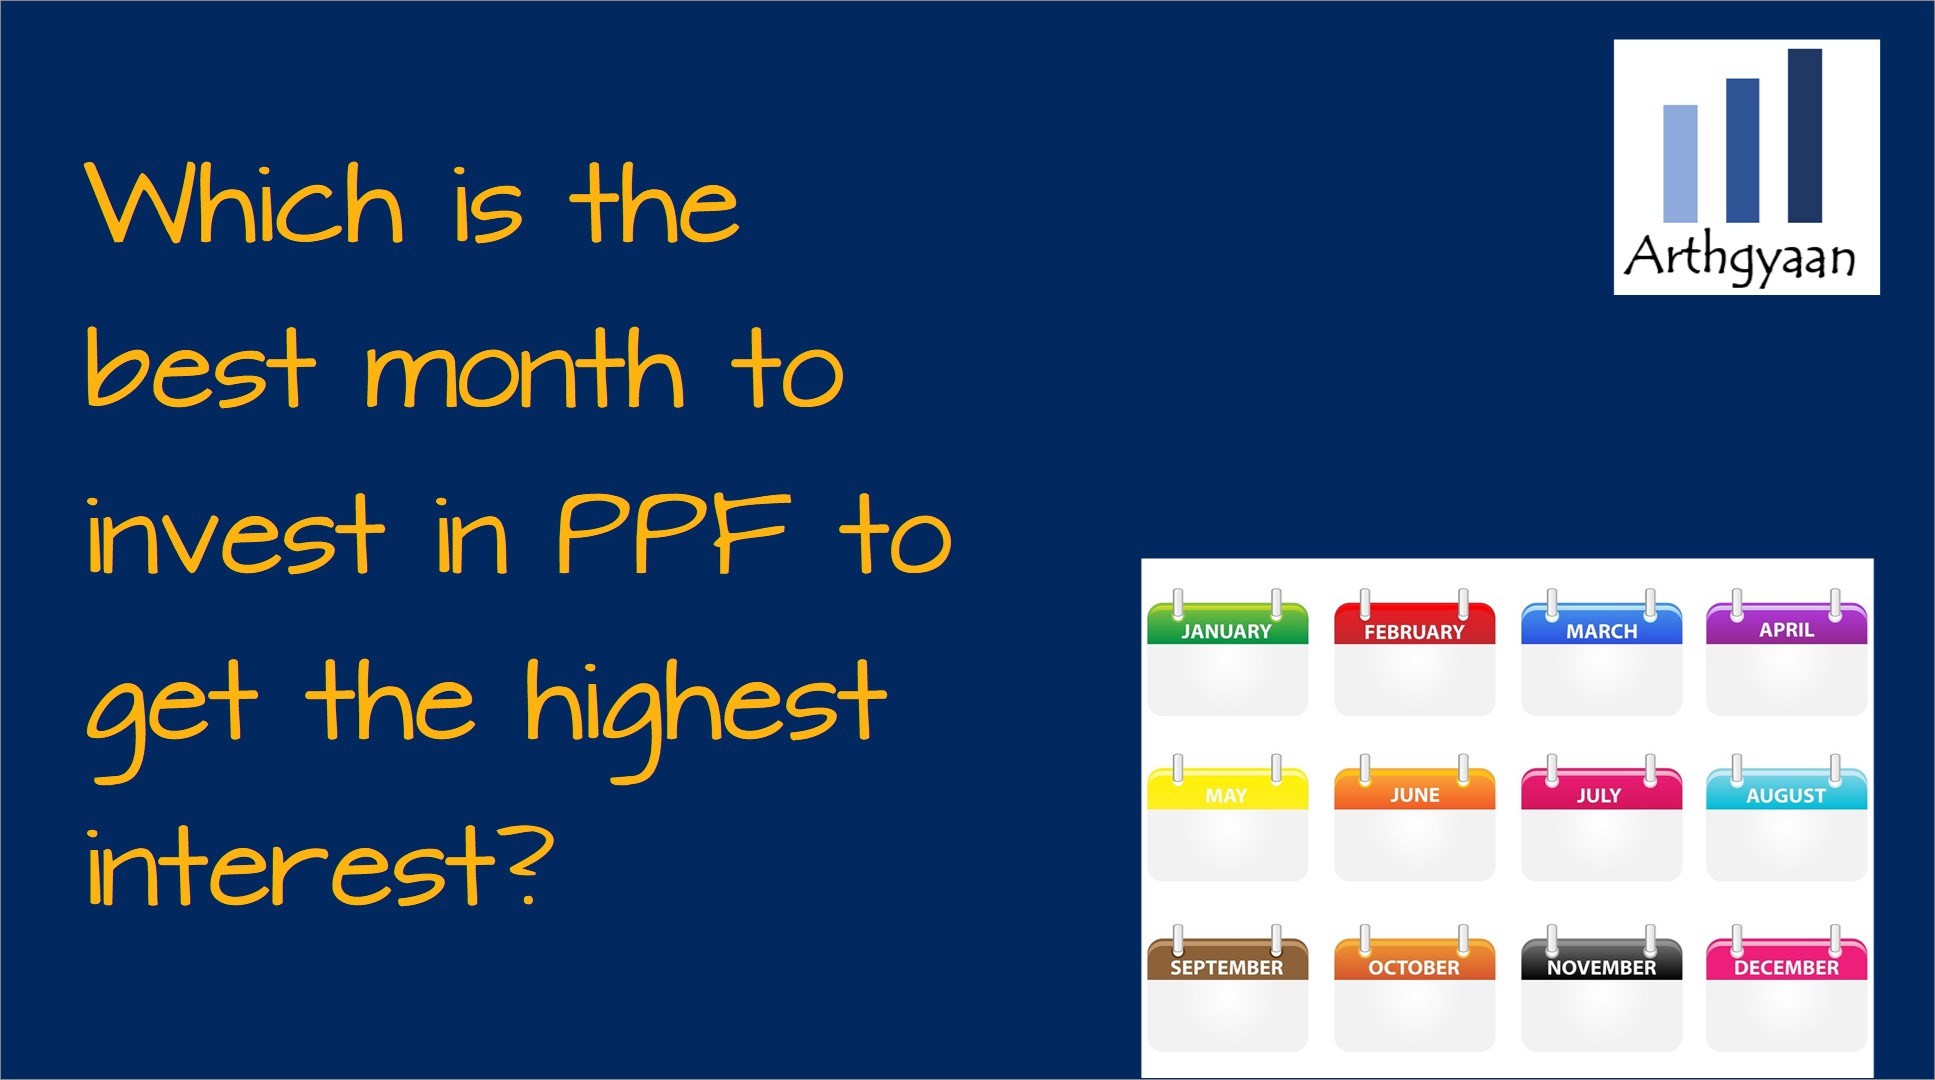 <p>This article explains how PPF interest calculation works so that you can invest  in the best month to get the maximum interest.</p>

